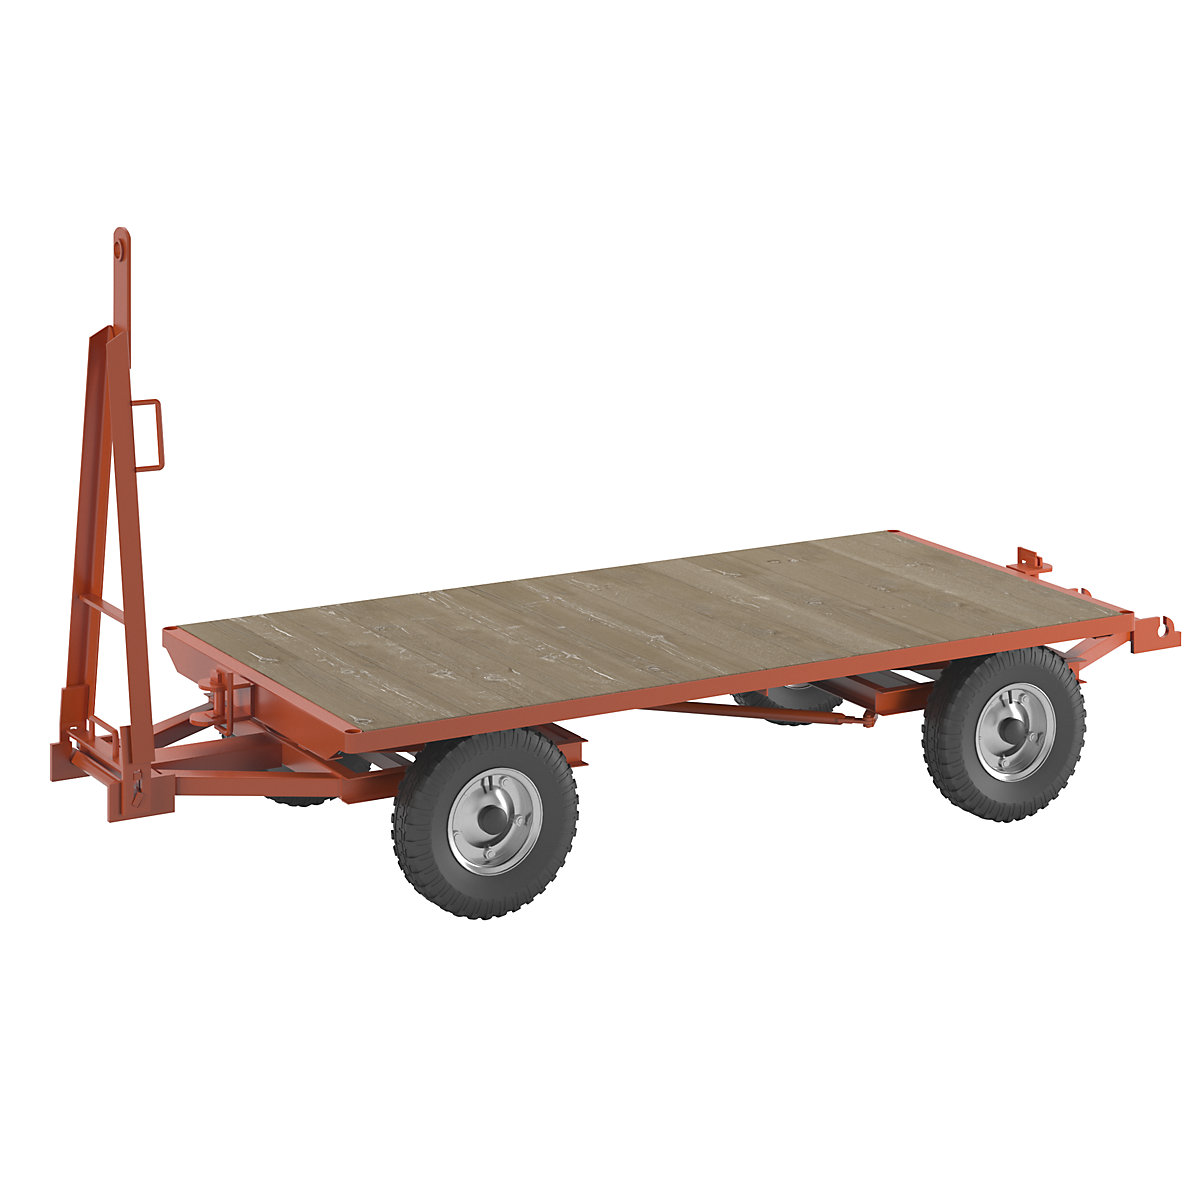 Trailer, 4-wheel double turntable steering, max. load 3 t, platform 2.0 x 1.0 m, pneumatic tyres-2